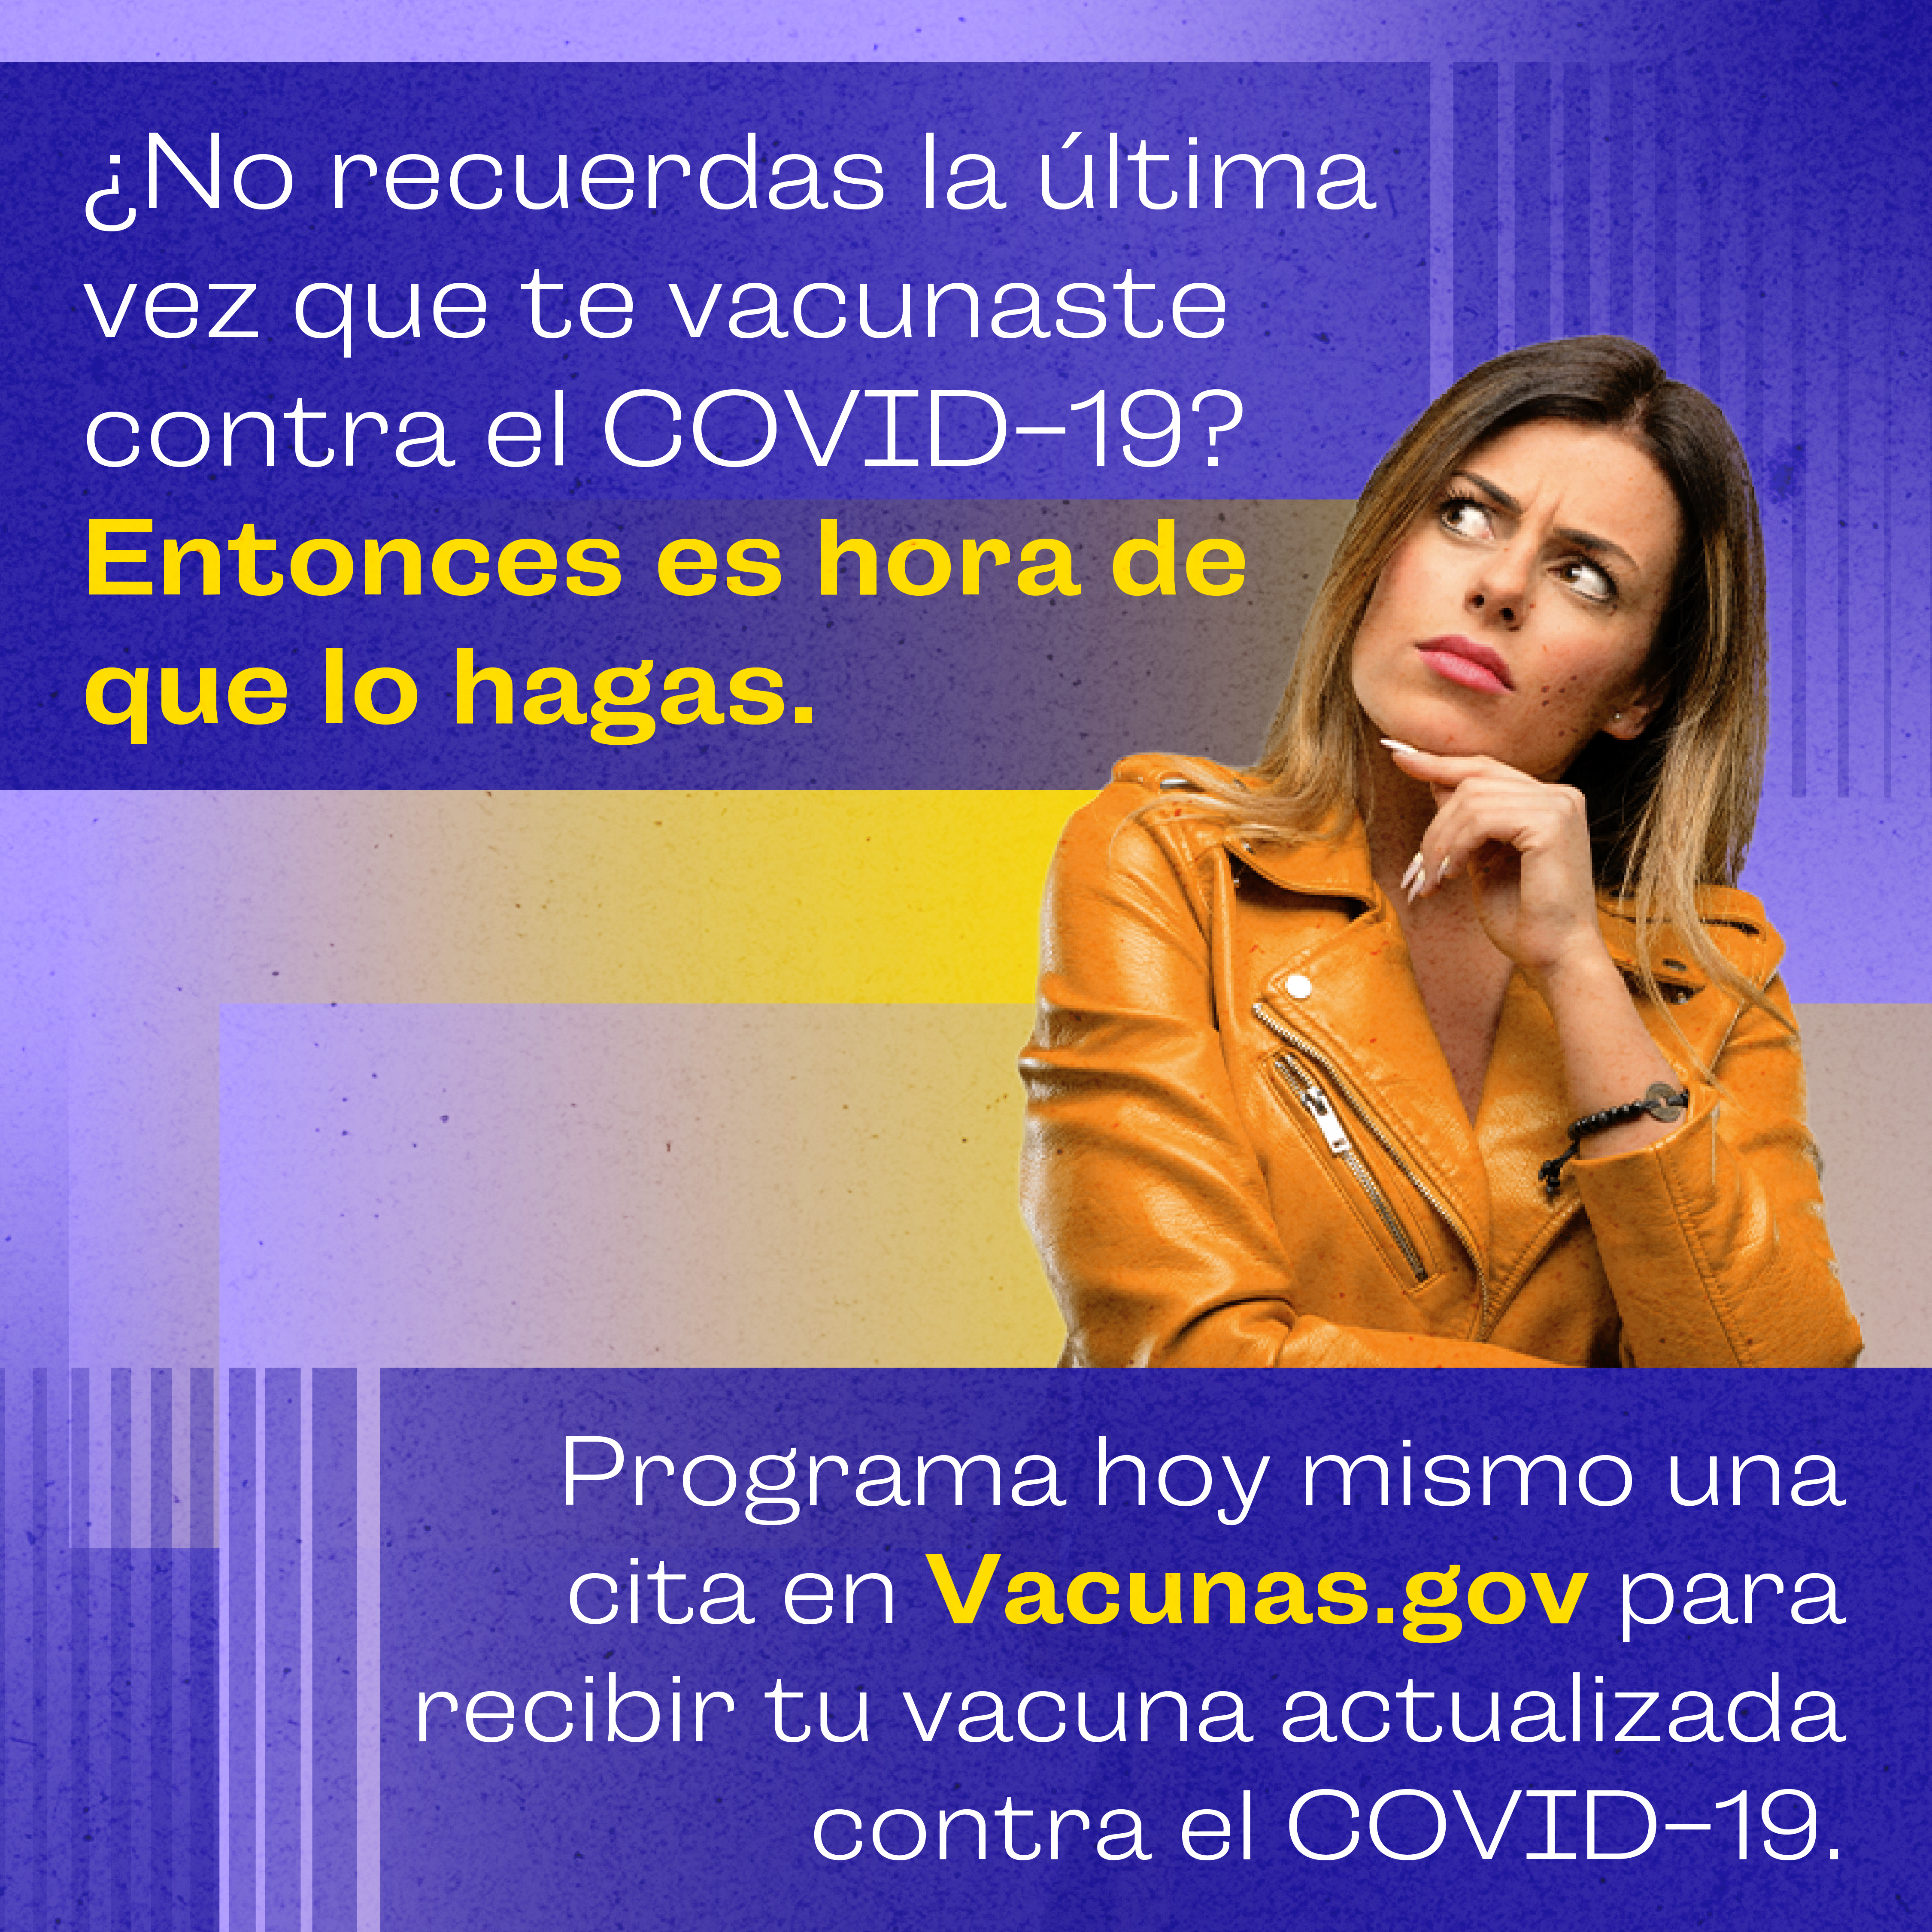 A Hispanic/Latina woman with a pensive look on her face poses in while though. Spanish text reads, "can't remember the last time you got a COVID-19 vaccine? Then it's time. Schedule your updated COVID-19 vaccine today at vaccines.gov."